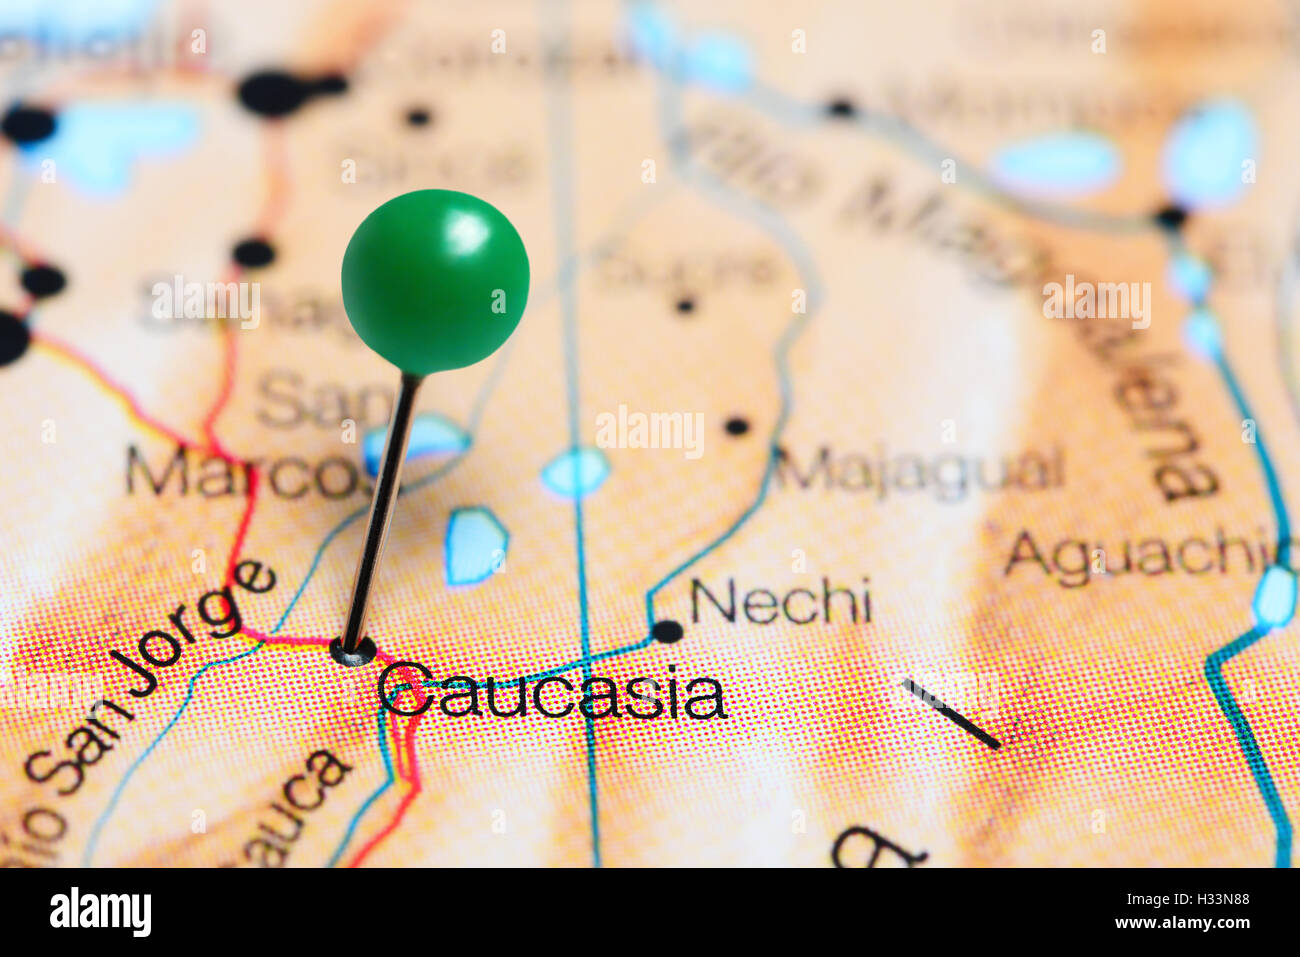 Caucasia pinned on a map of Colombia Stock Photo